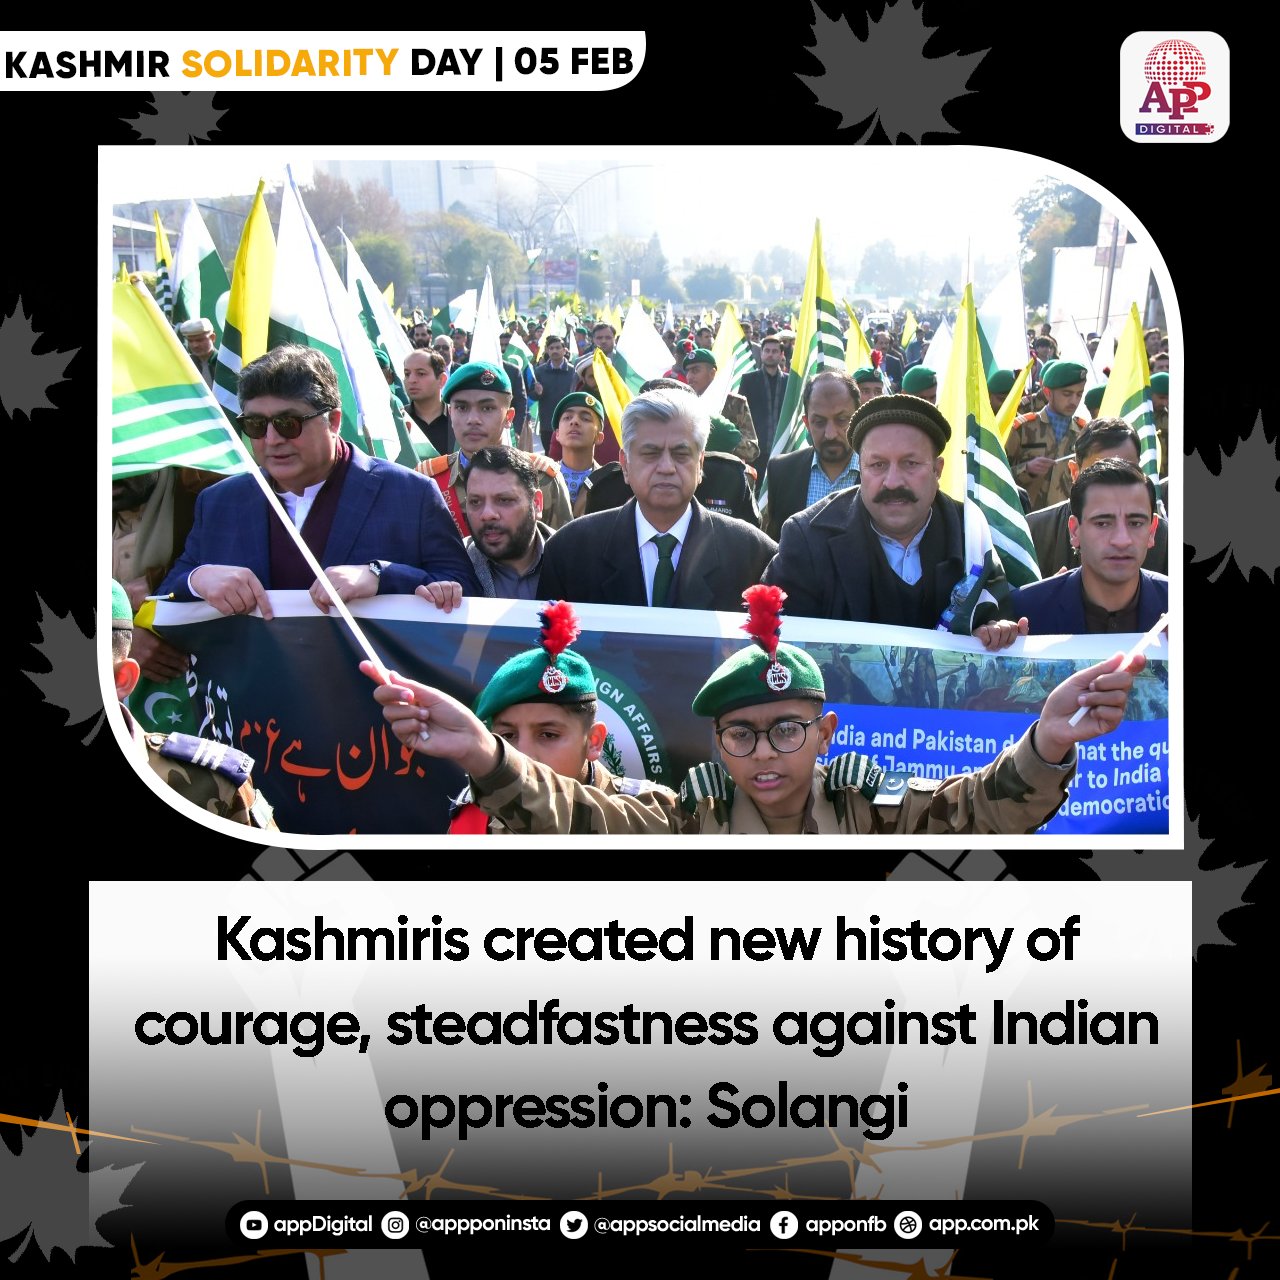 Kashmiris created new history of courage, steadfastness against Indian oppression: Solangi